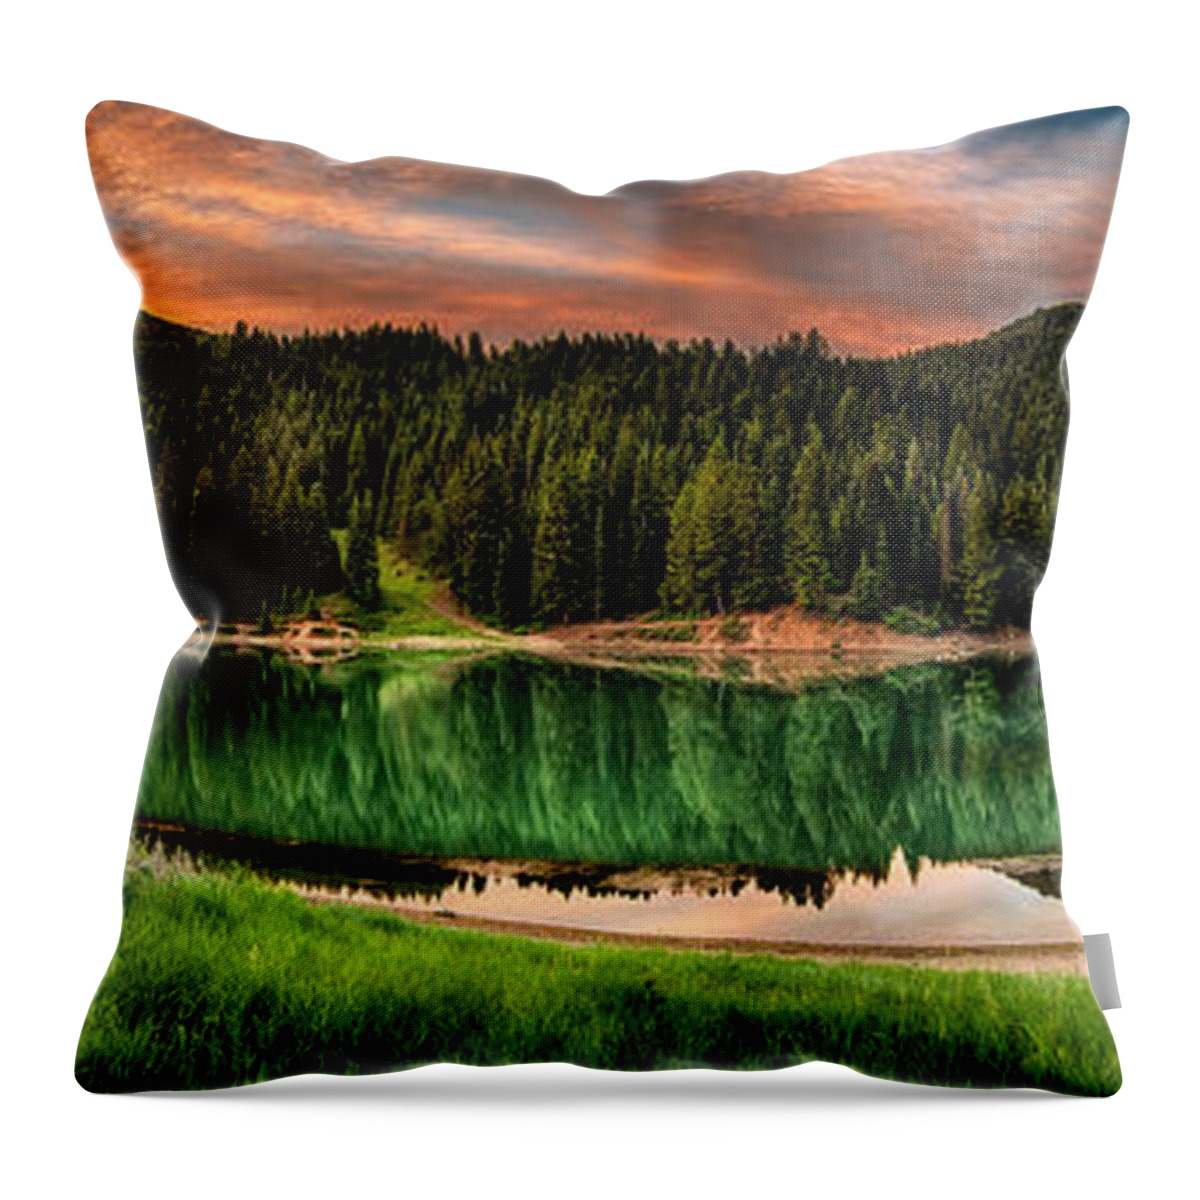 Reservoir Throw Pillow featuring the photograph Tranquility by Brett Engle